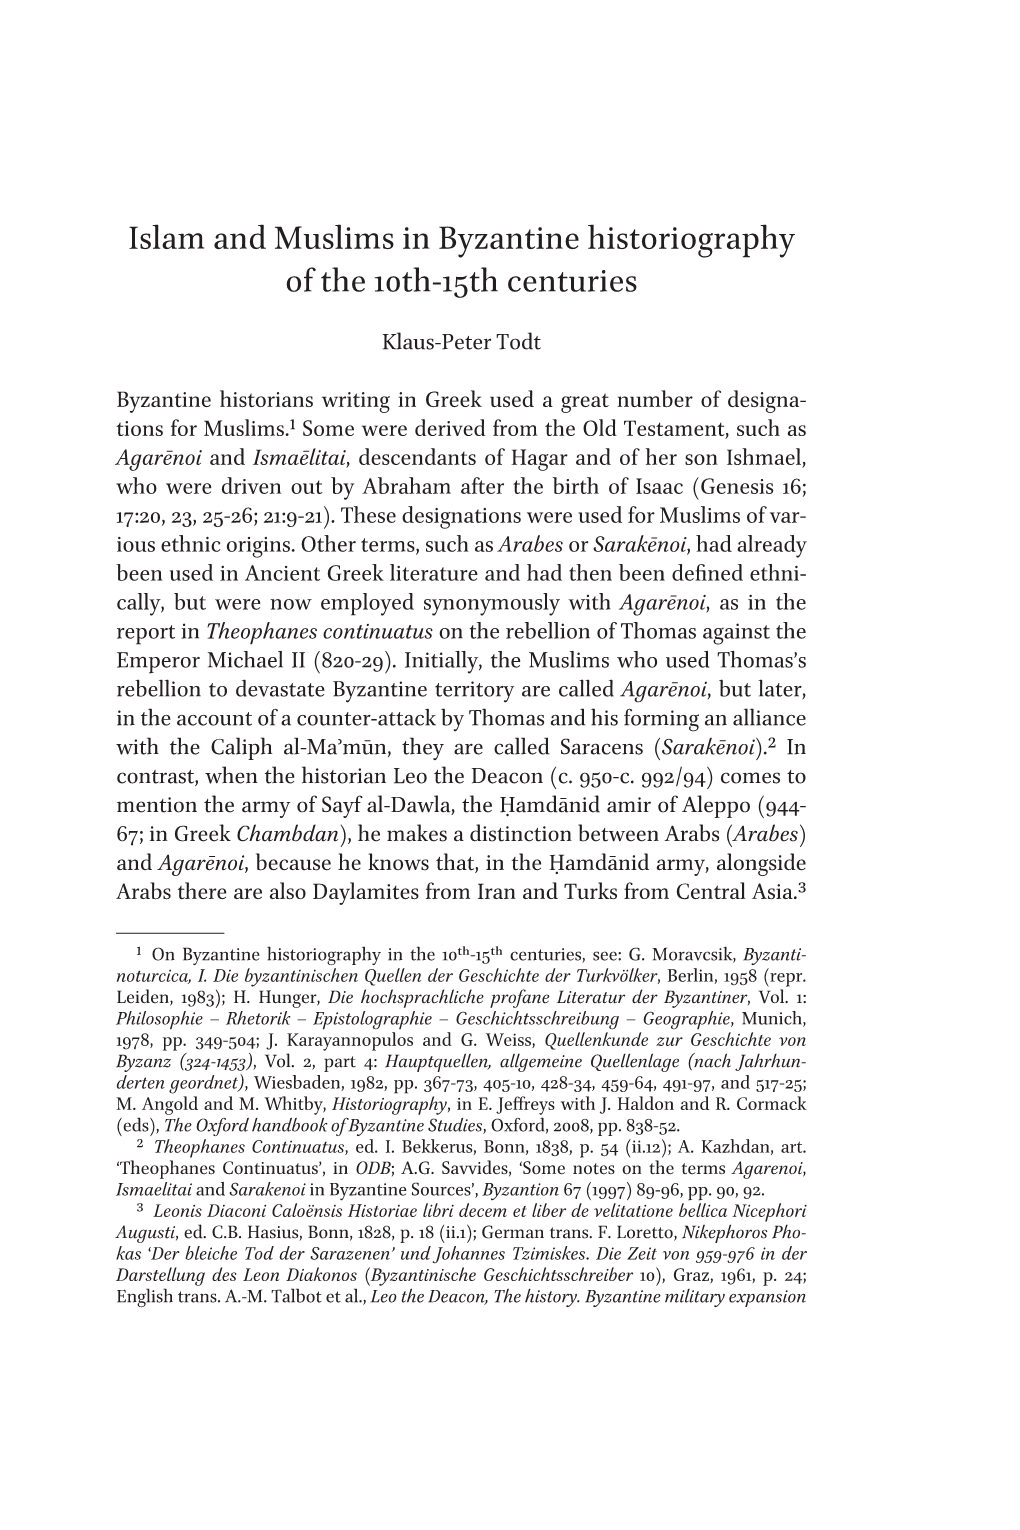 Islam and Muslims in Byzantine Historiography of the 10Th-15Th Centuries